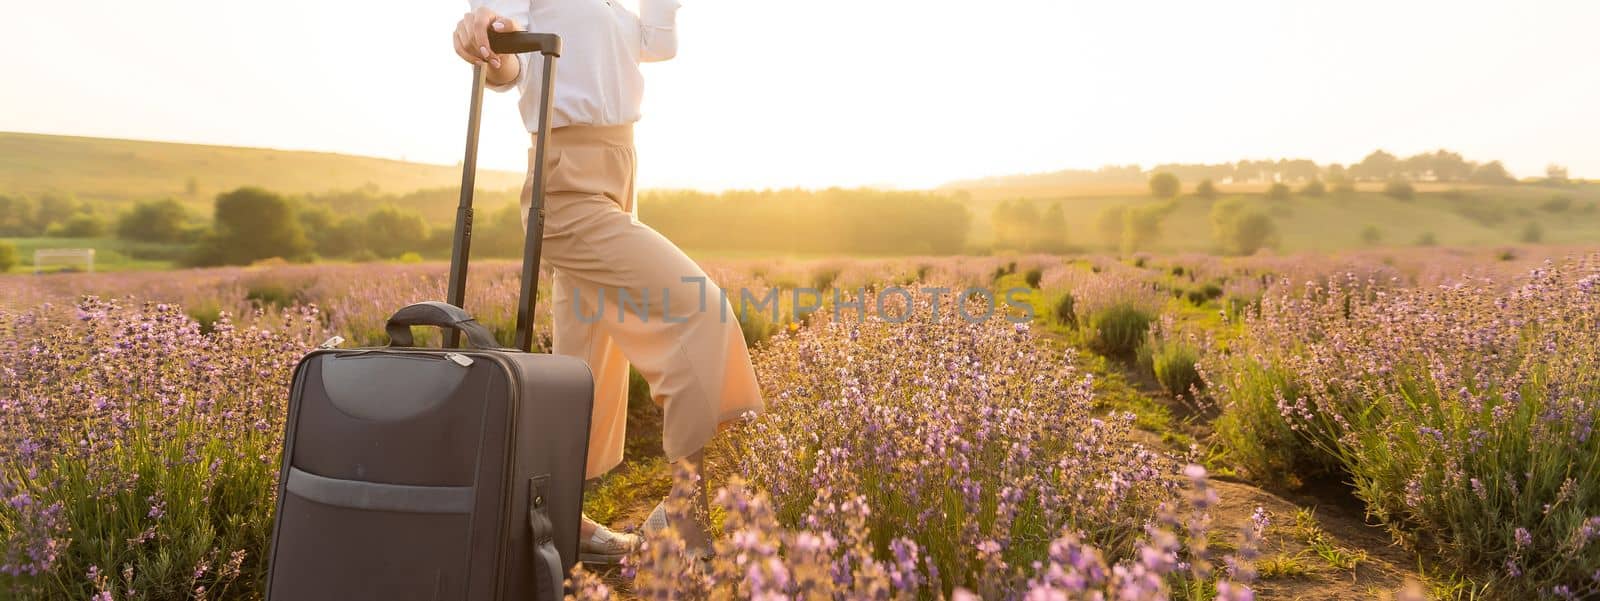 Beautiful young woman in lavender field standing with suitcase.